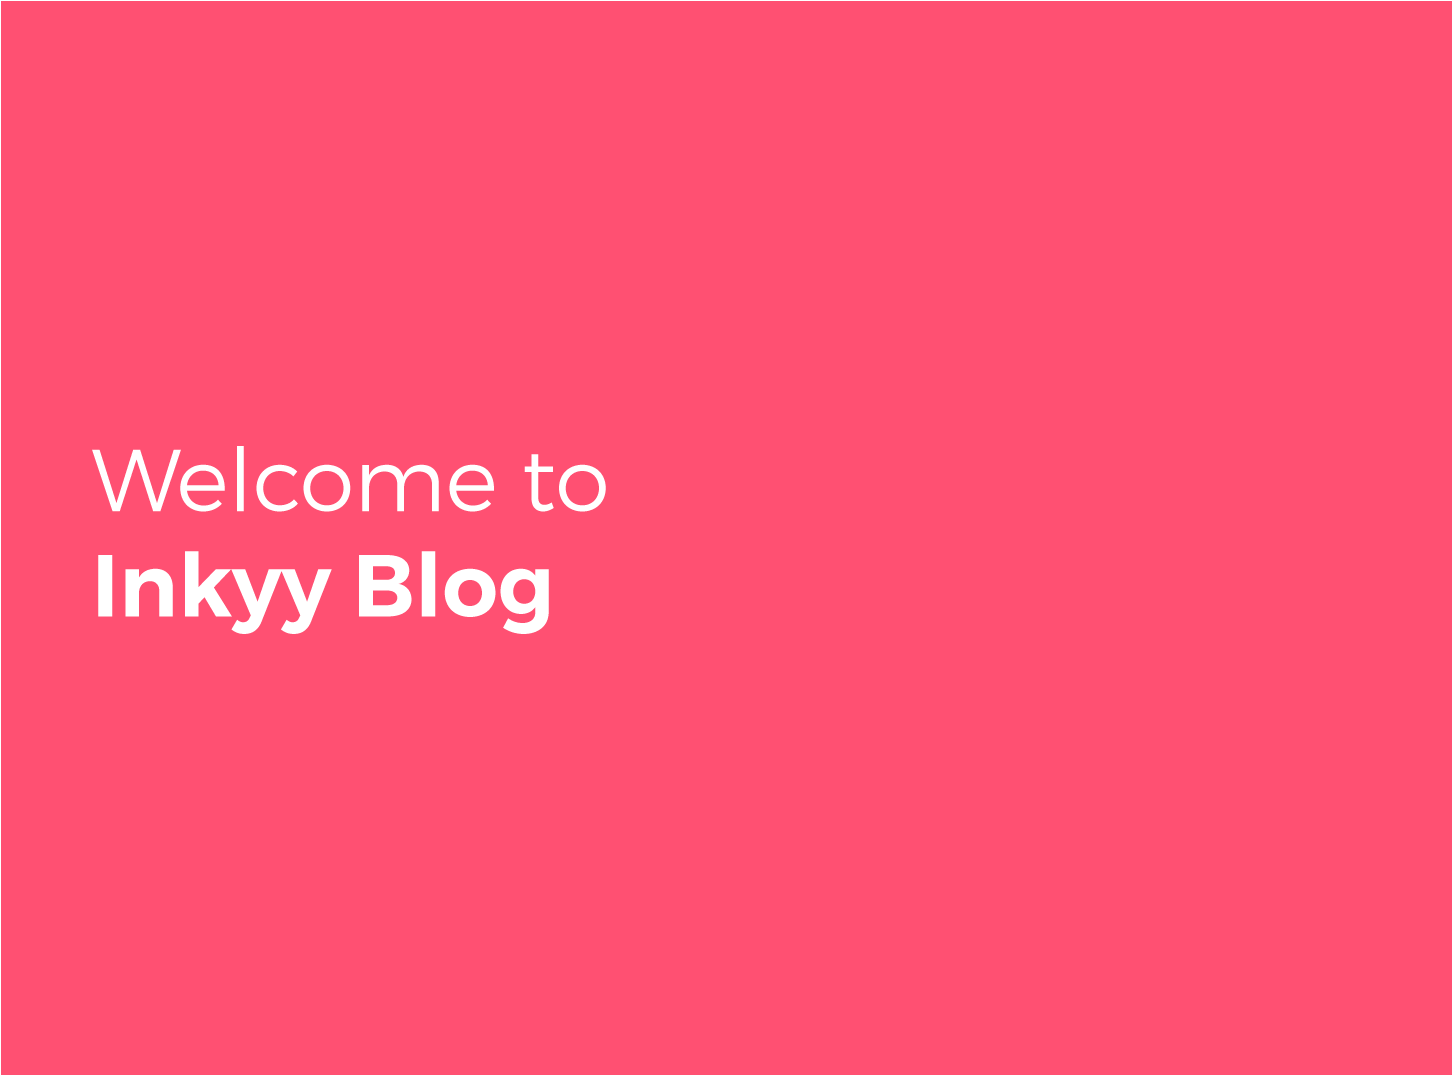 Welcome to Inkyy Blog image white letters on red background